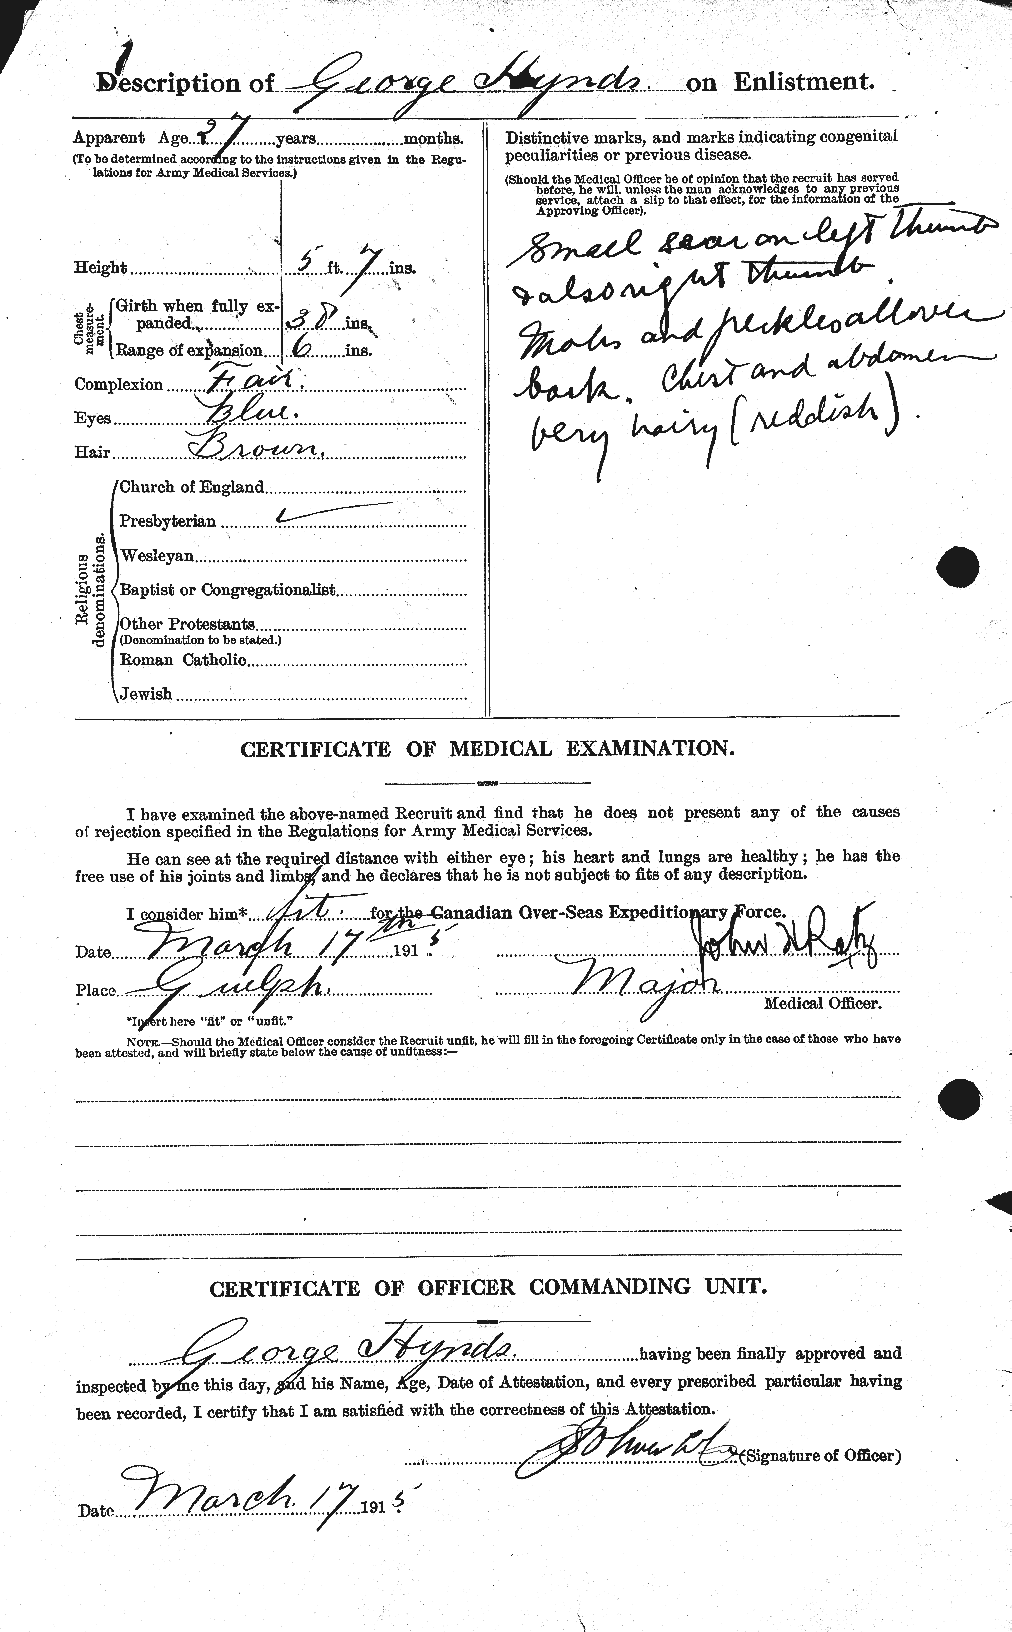 Personnel Records of the First World War - CEF 411515b